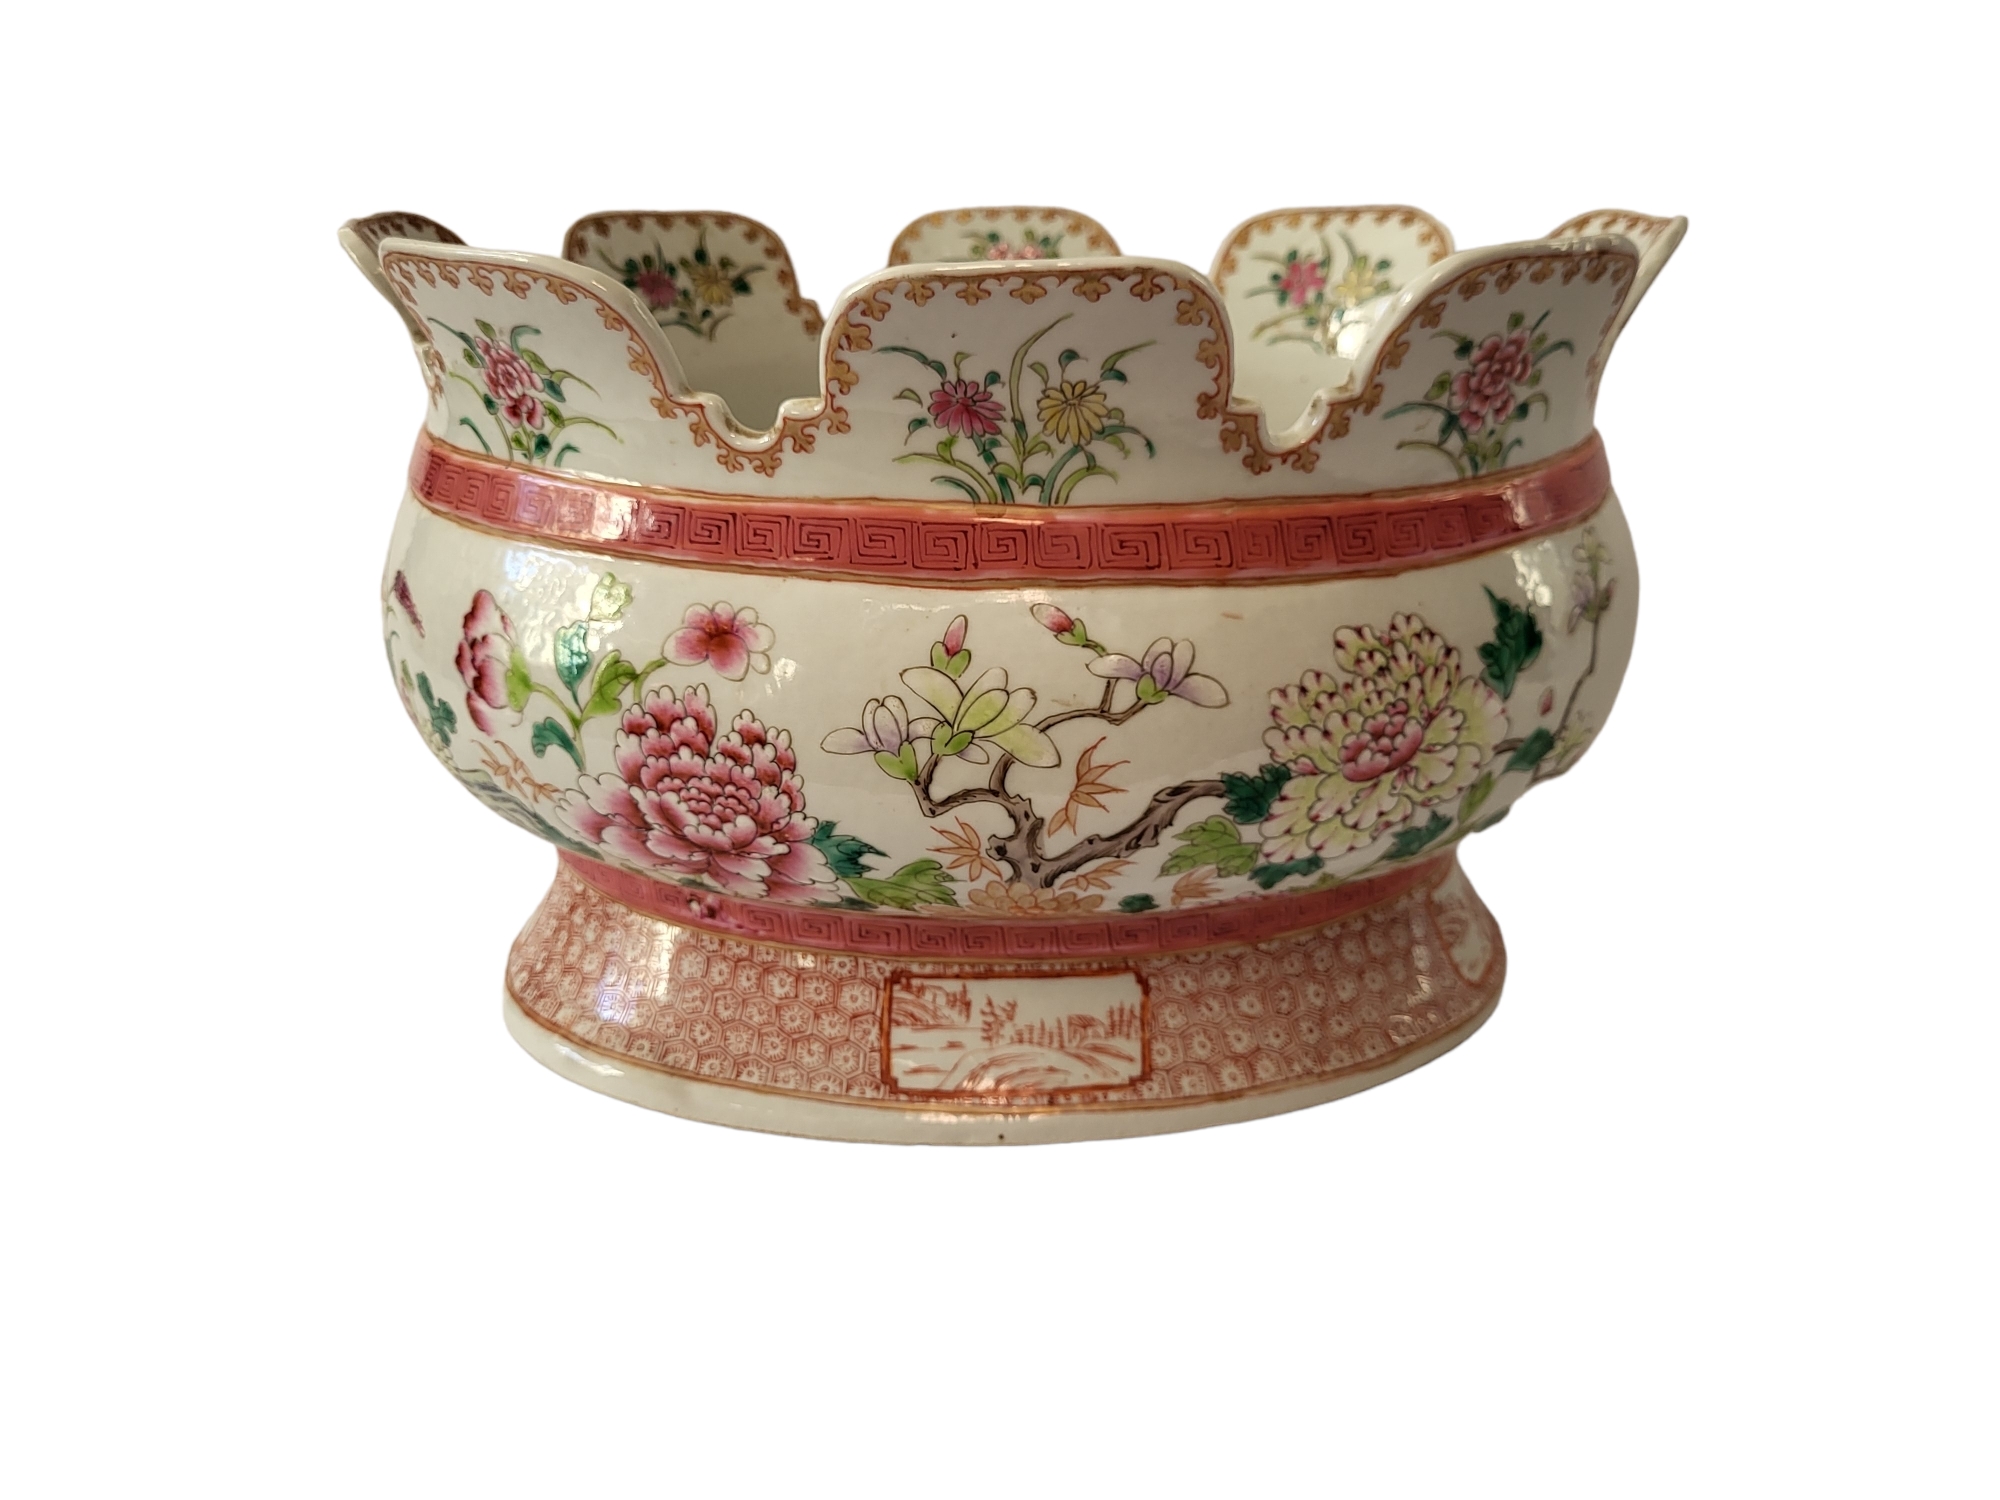 A FINE 19TH CENTURY CHINESE FAMILLE ROSE HARD PASTE PORCELAIN EXPORT WARE JARDINIÈRE Qing - Image 4 of 6